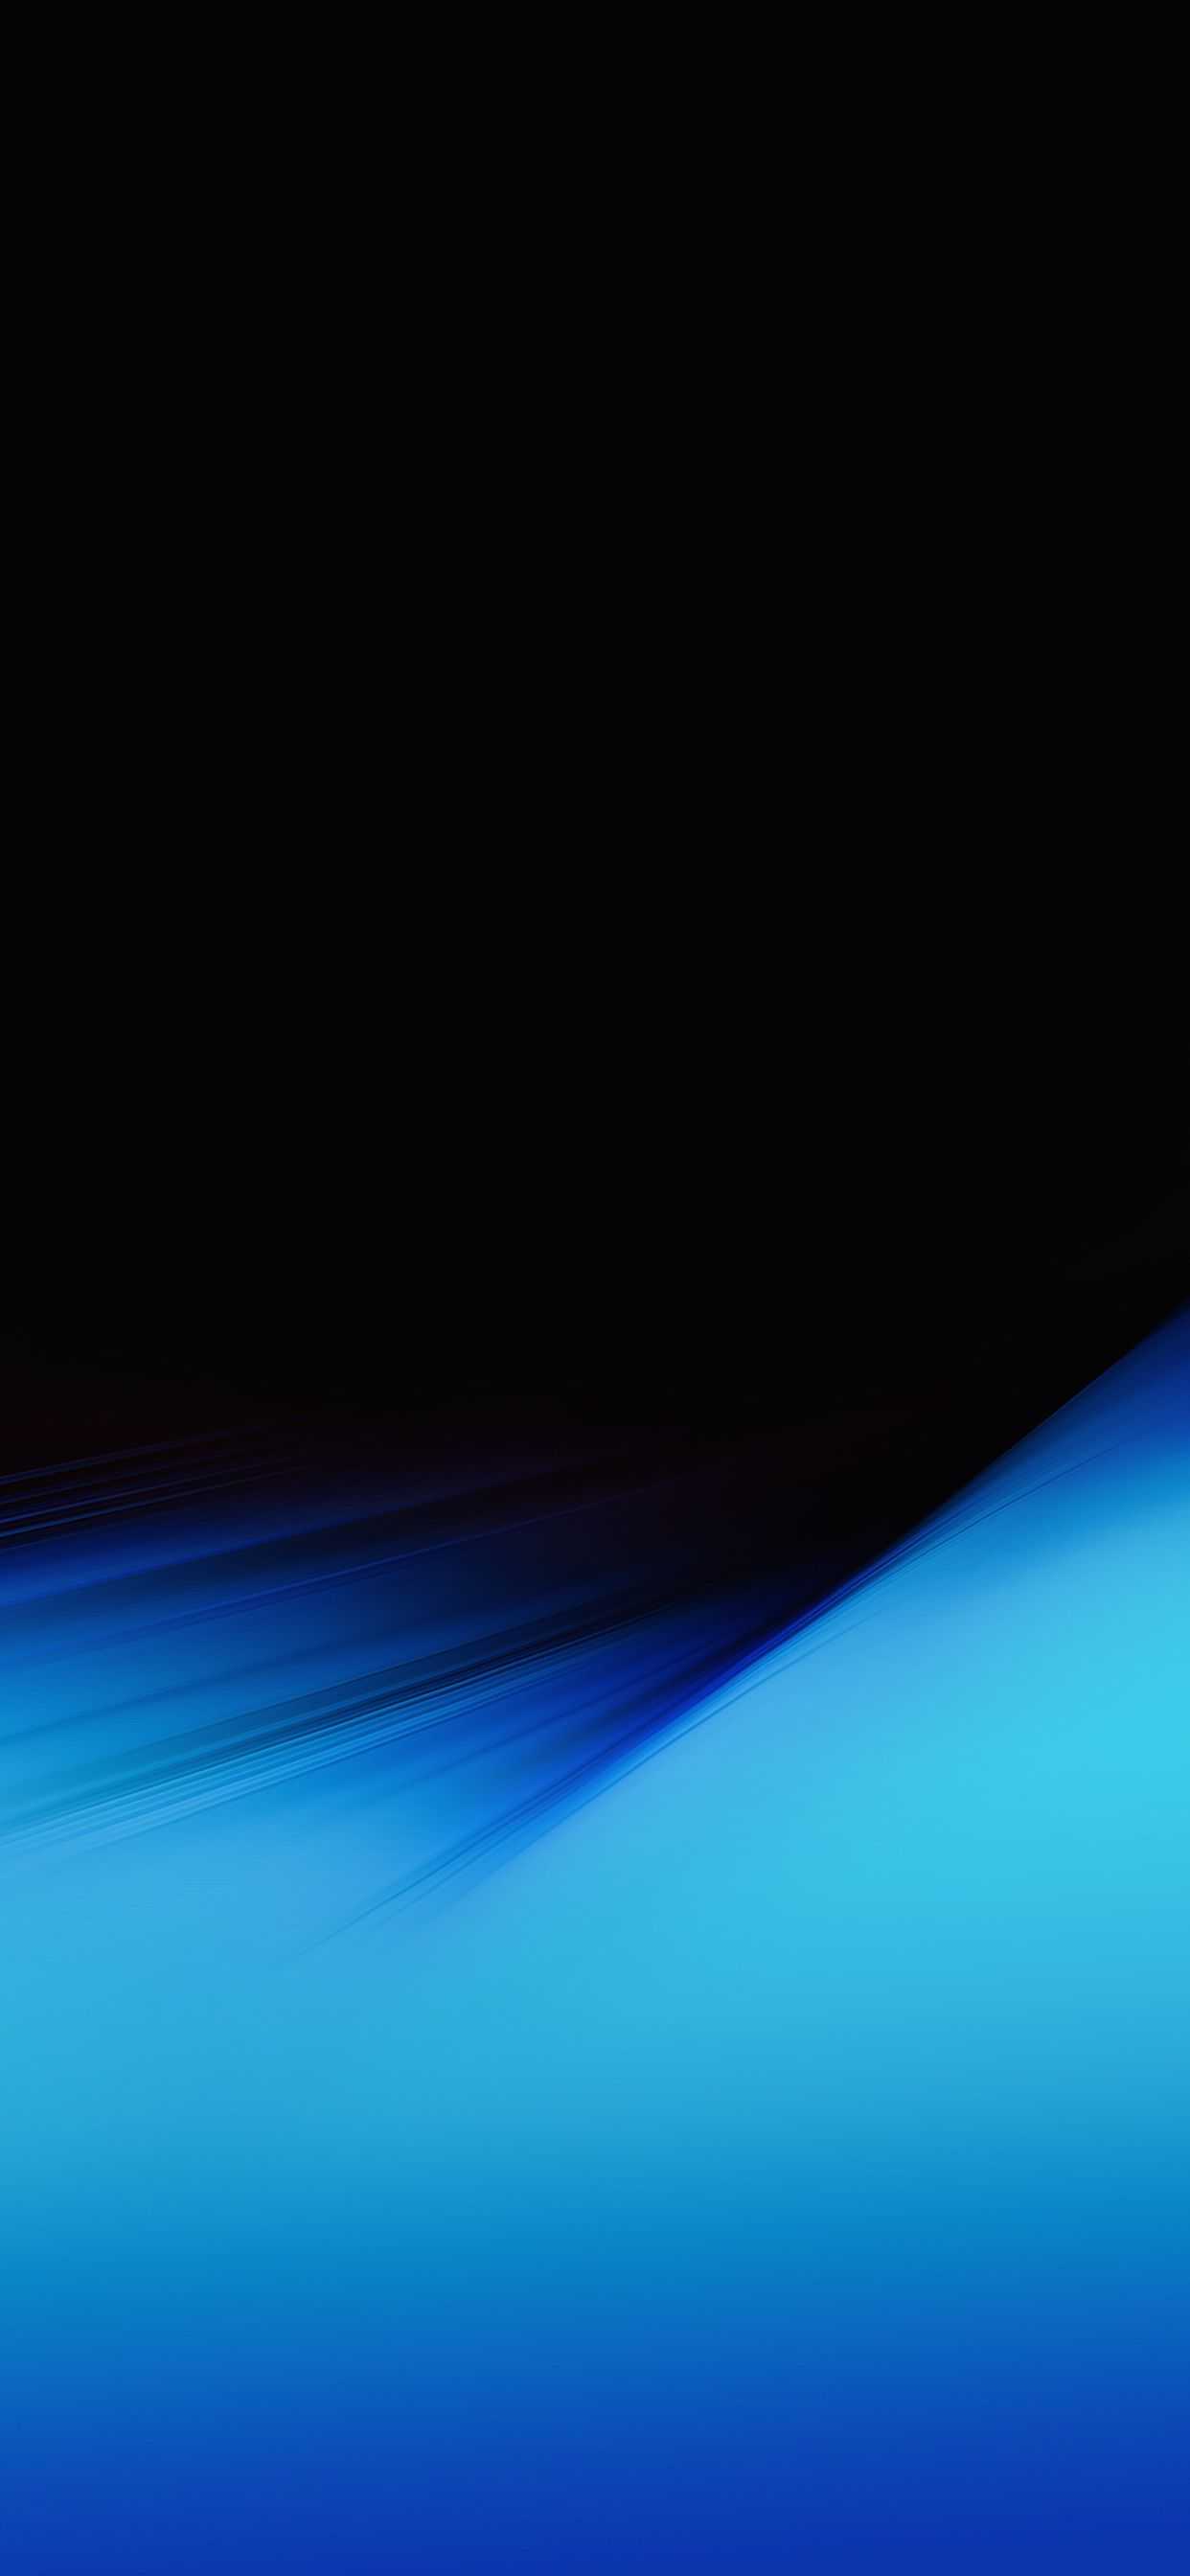 IPhone Black And Blue Wallpaper - iXpap